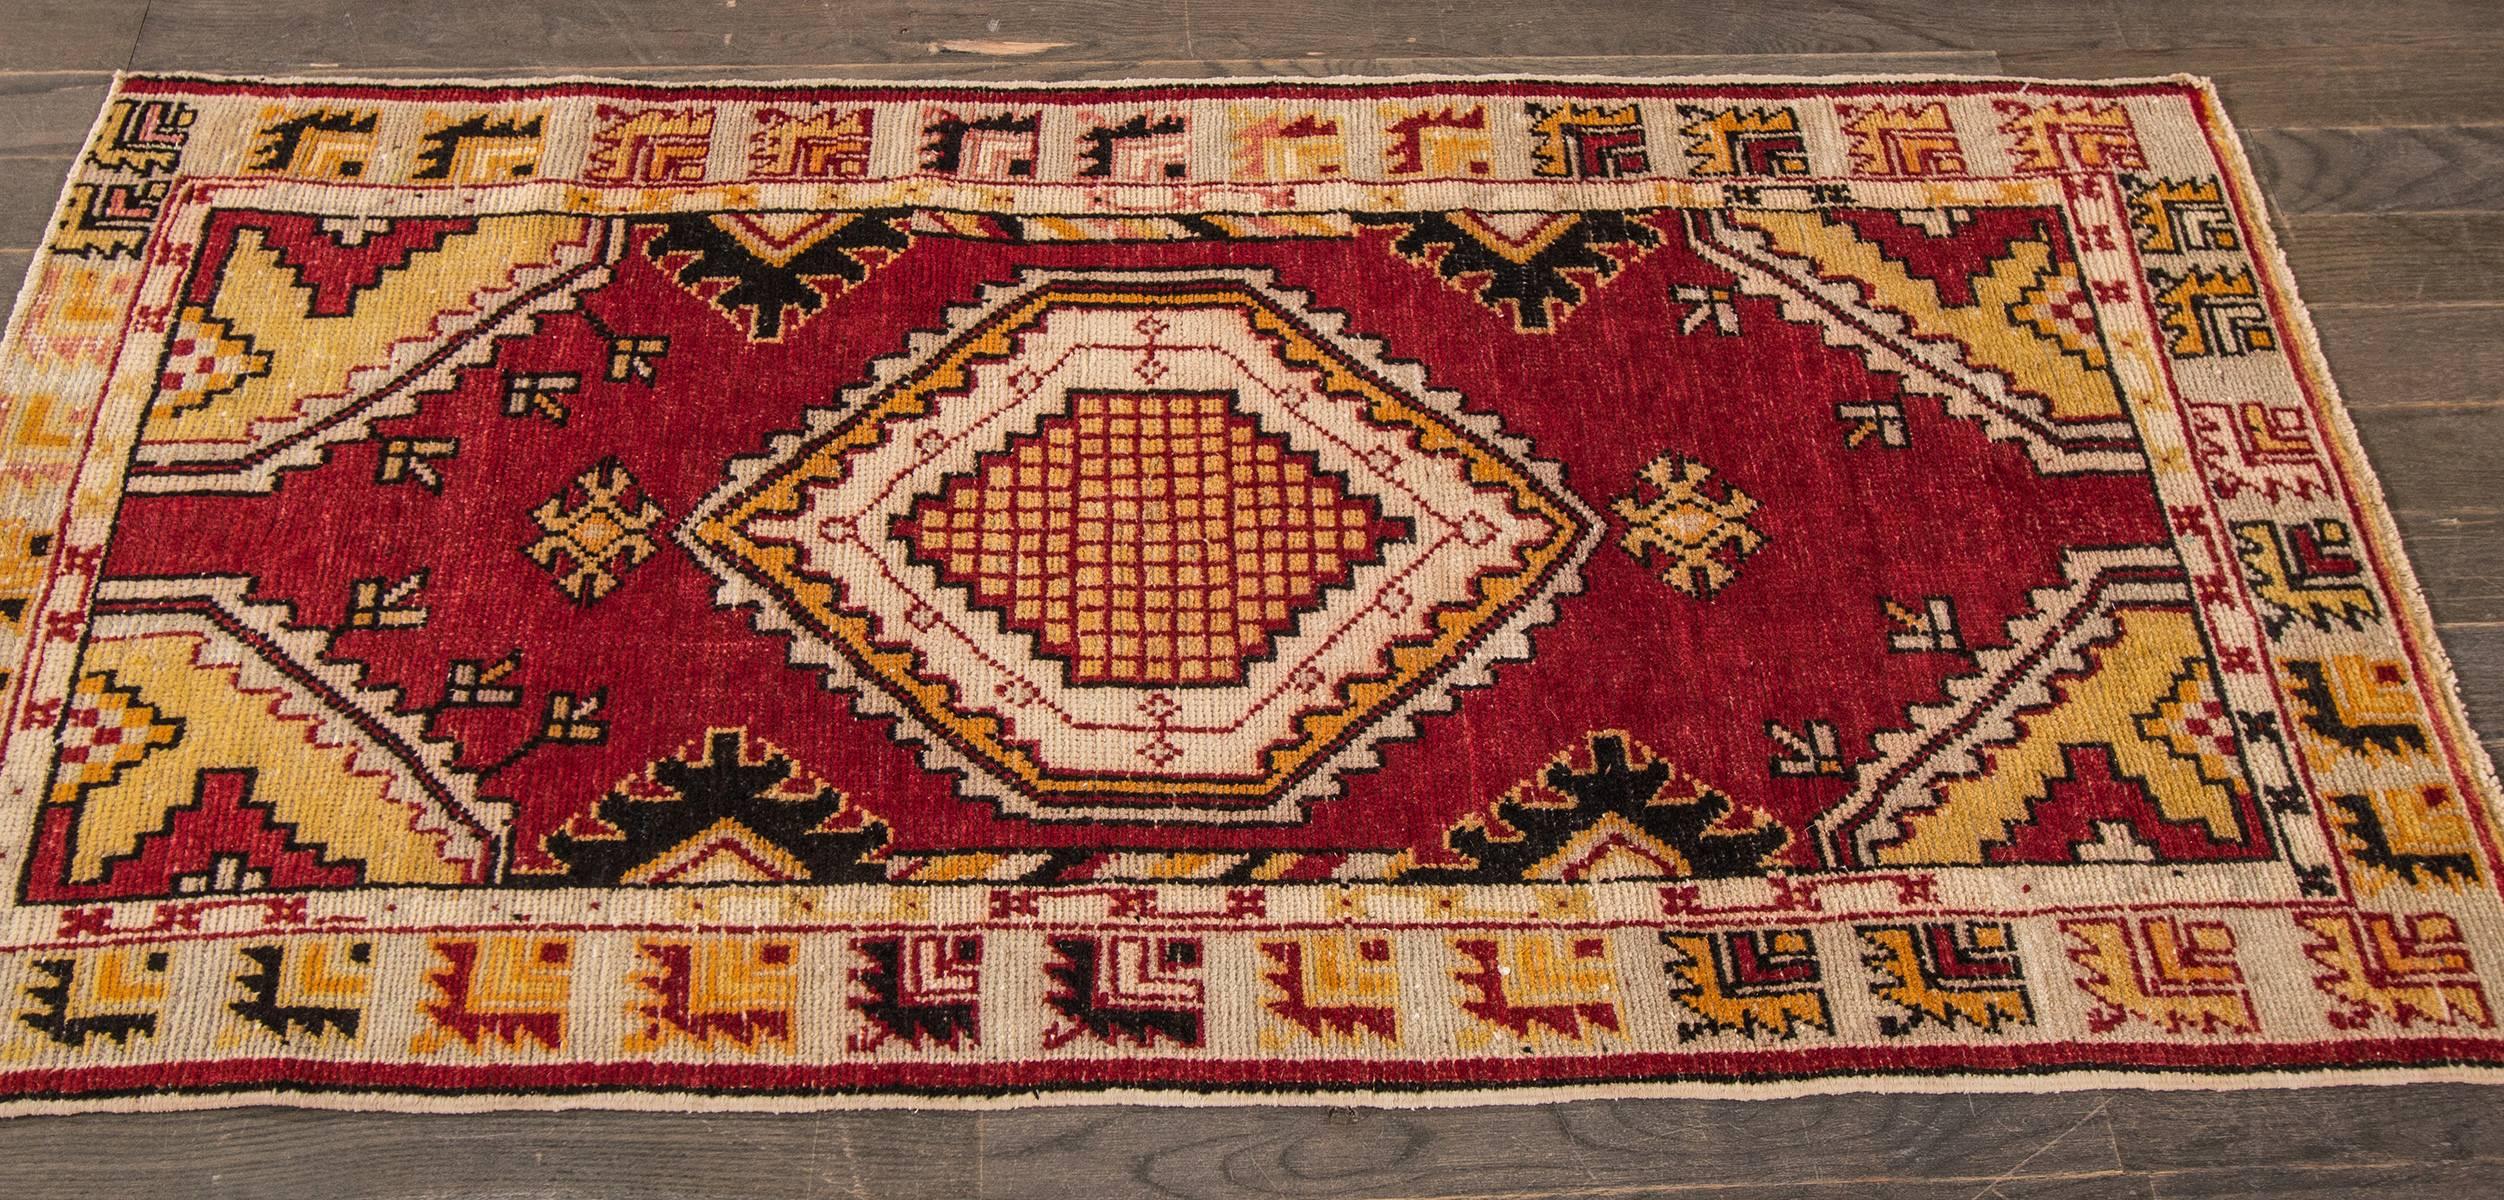 A hand-knotted vintage Anatolian rug with a geometric design on a red field. Accents of yellow, green and ivory throughout. This rug measures 2'.6 x 5'.